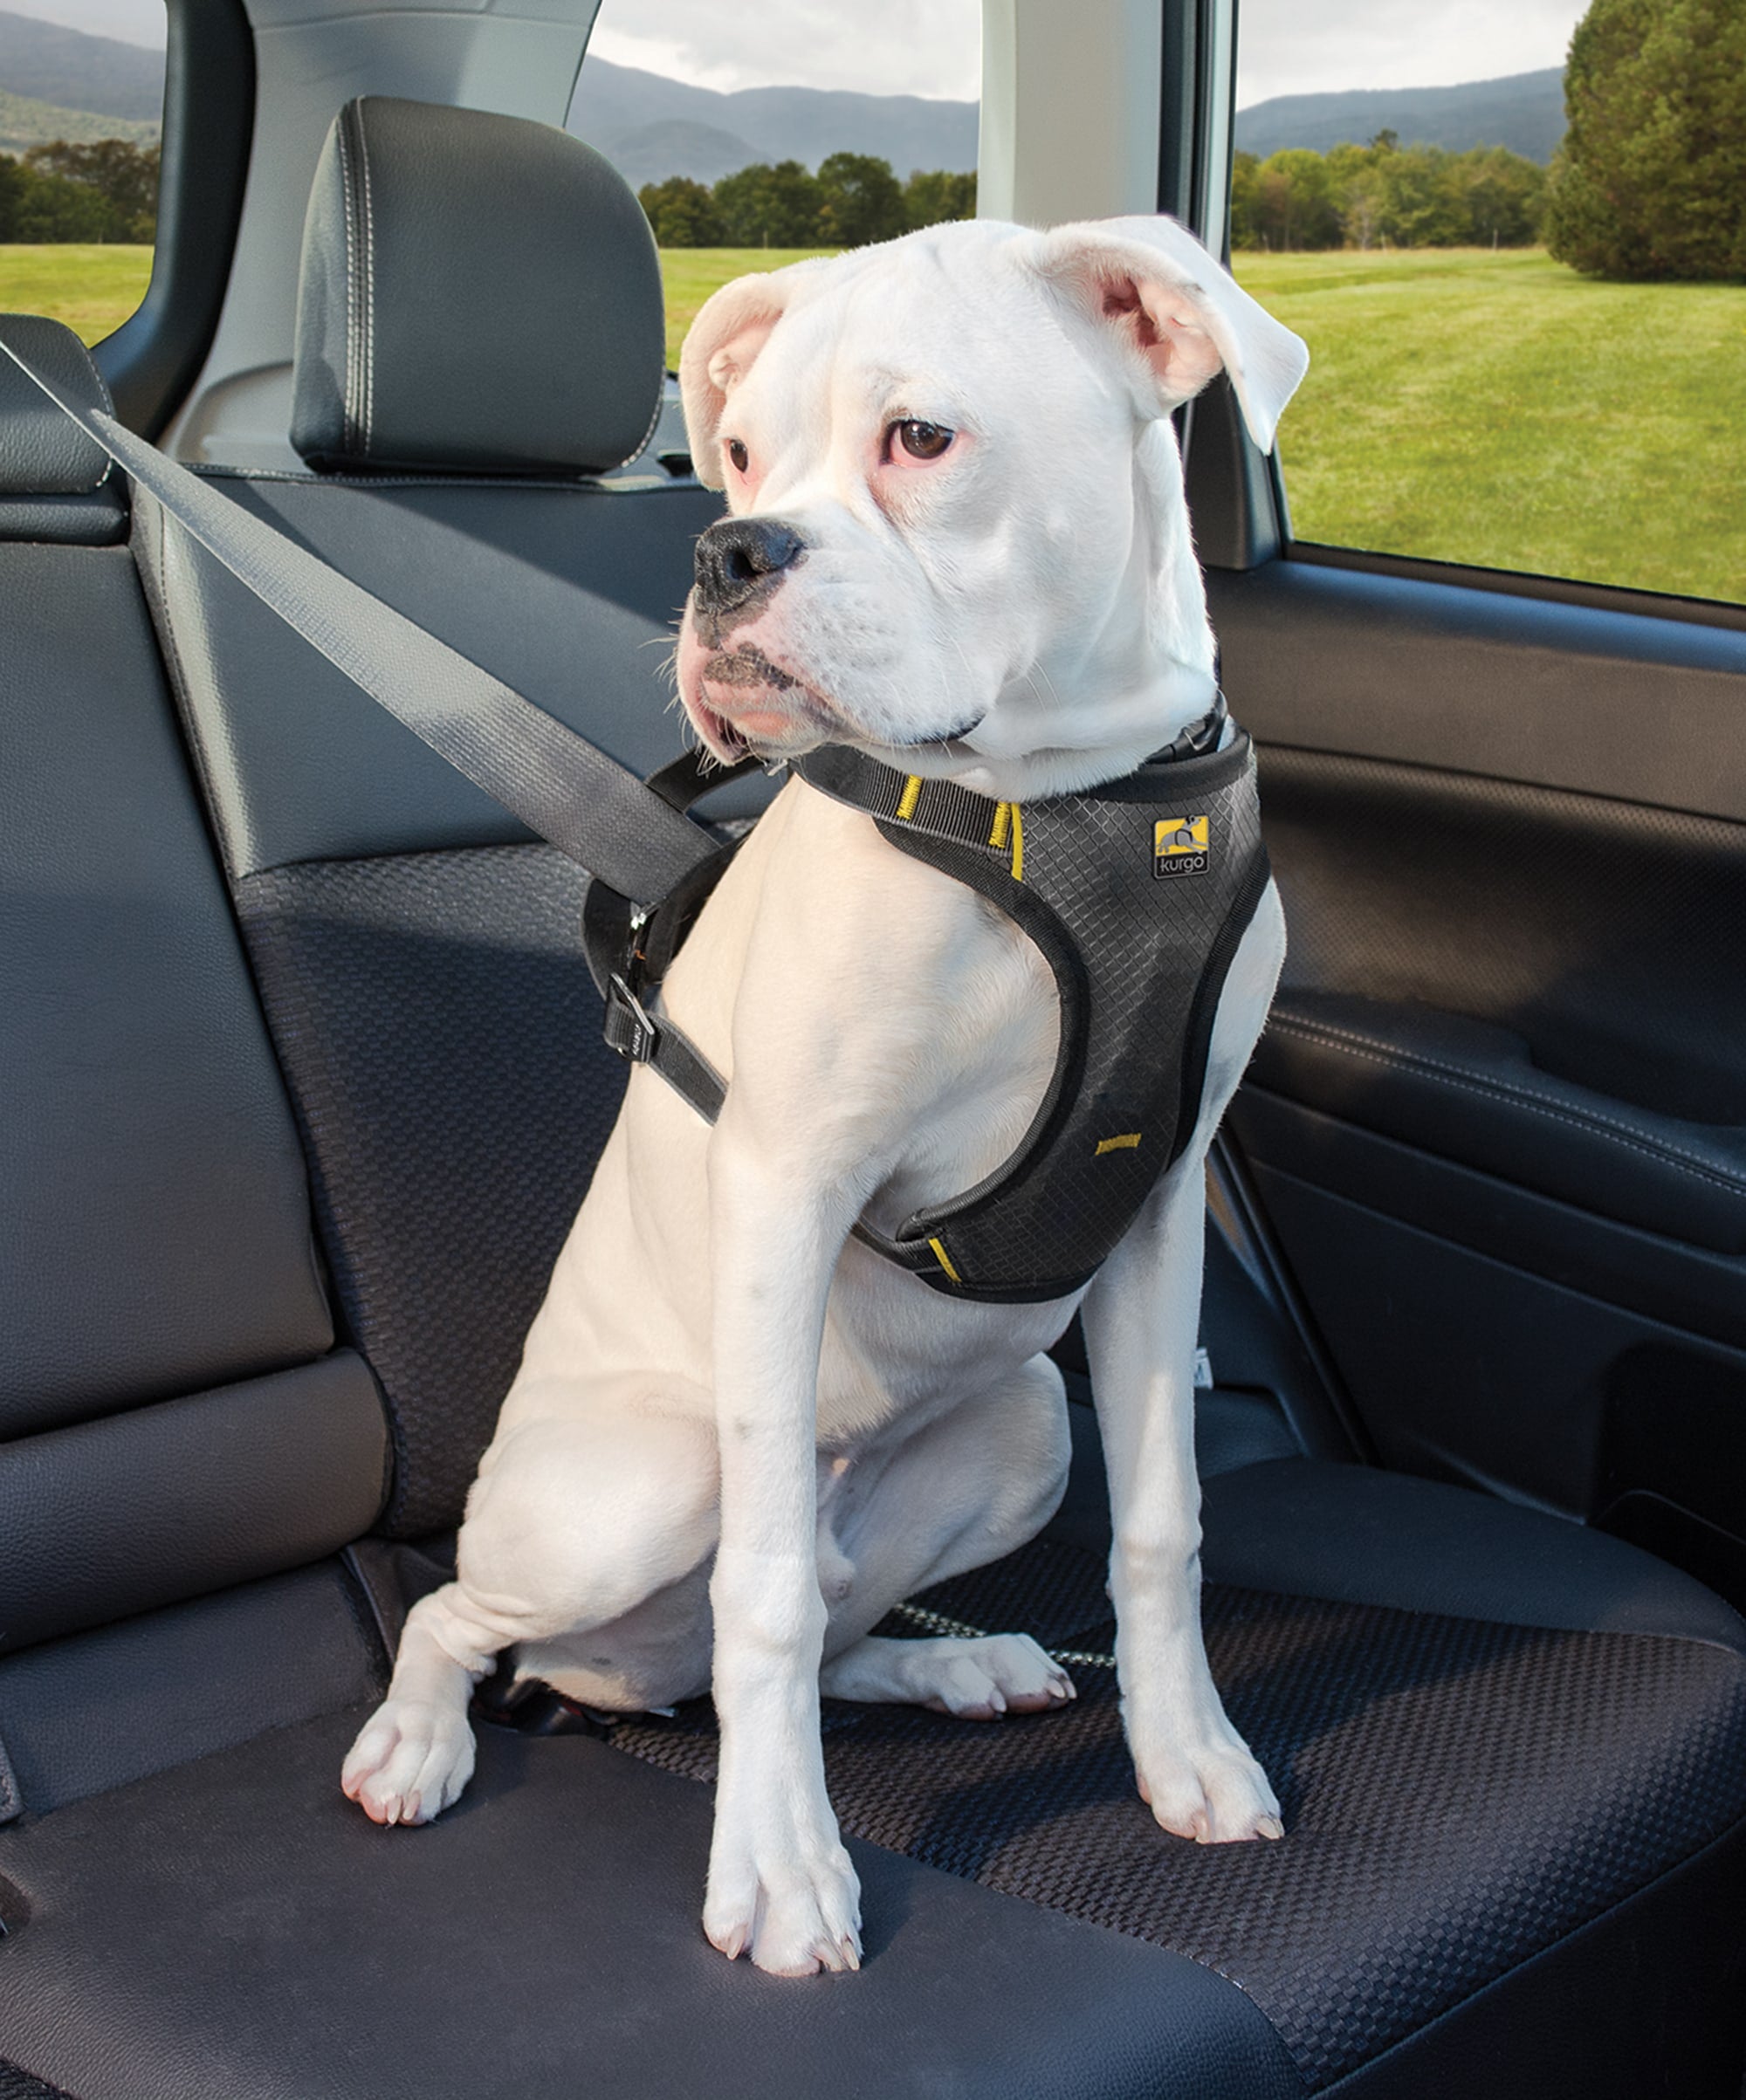 Can I Use My Dog's Harness With a Seatbelt? Safety First!